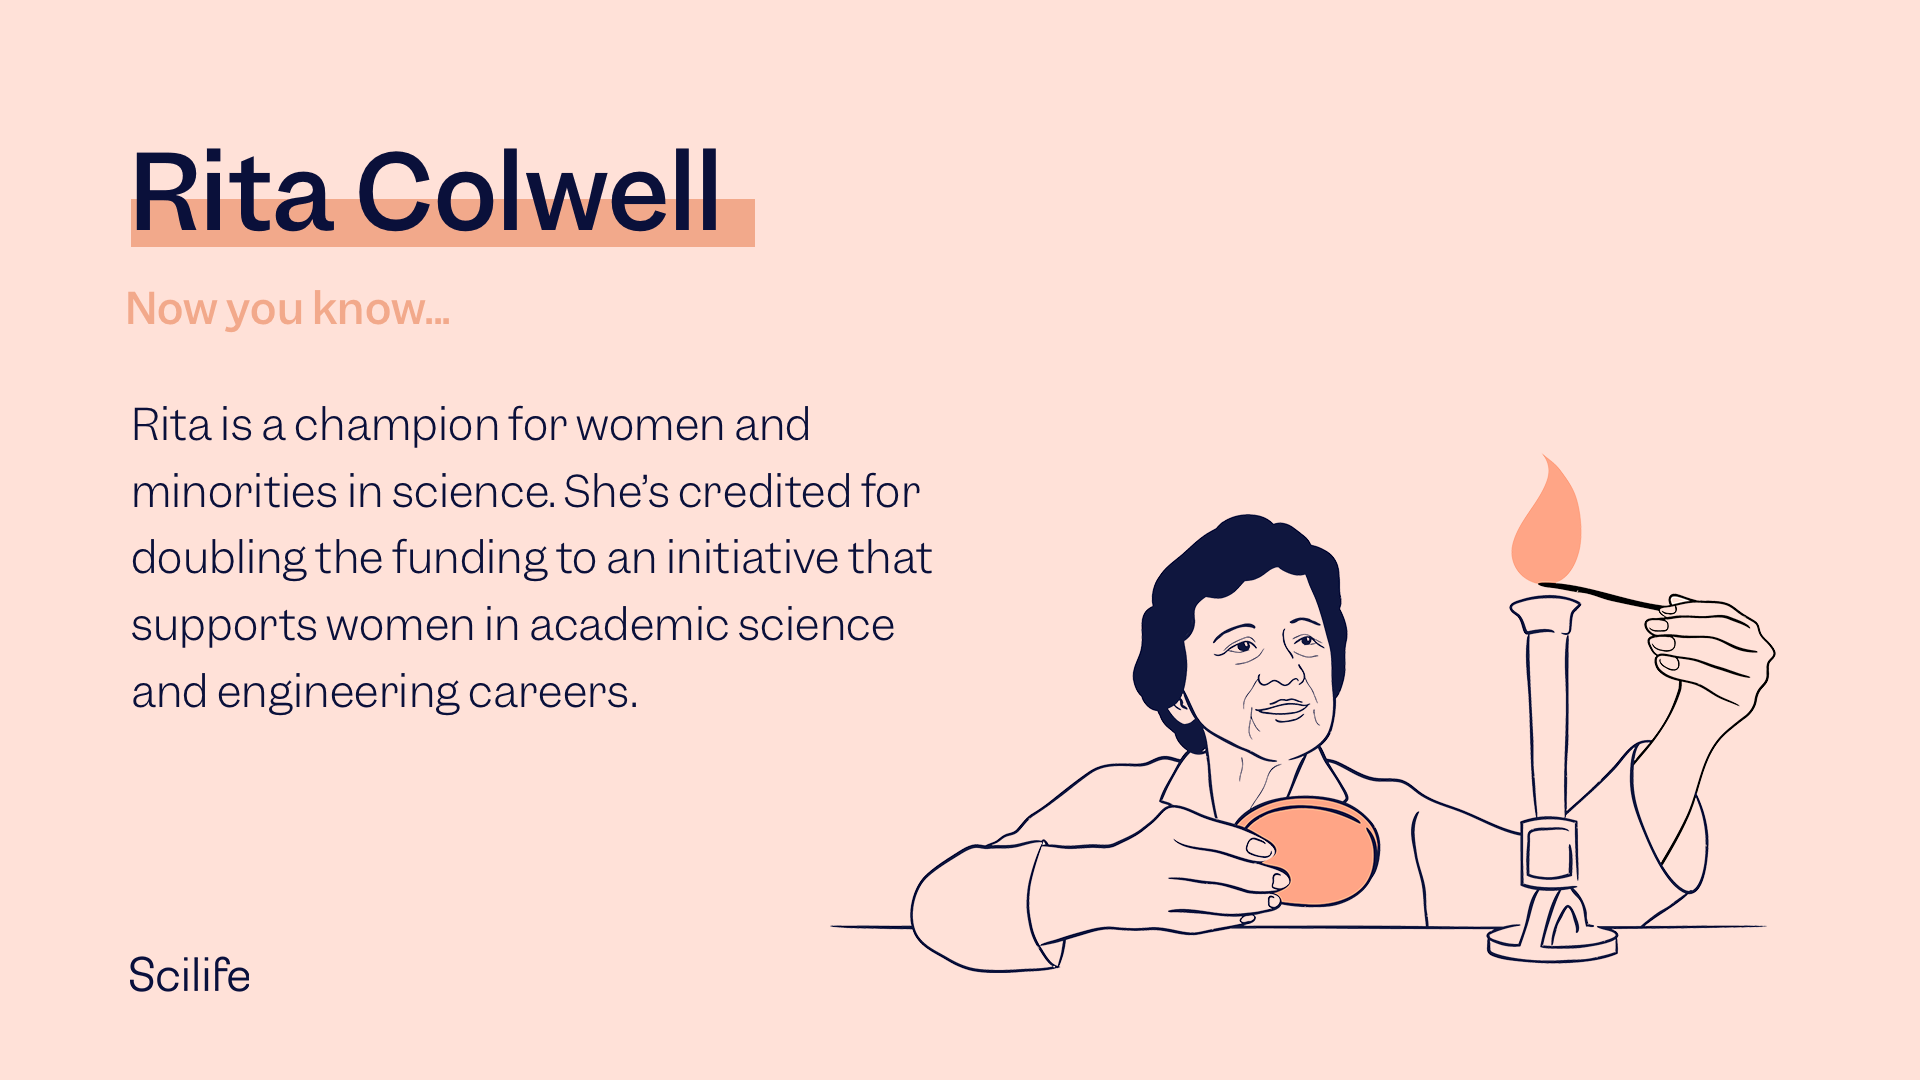 Illustration of Rita Colwell with the text:  Rita is a champion for women and minorities in science. She’s credited for doubling the funding to an initiative that supports women in academic science and engineering careers.